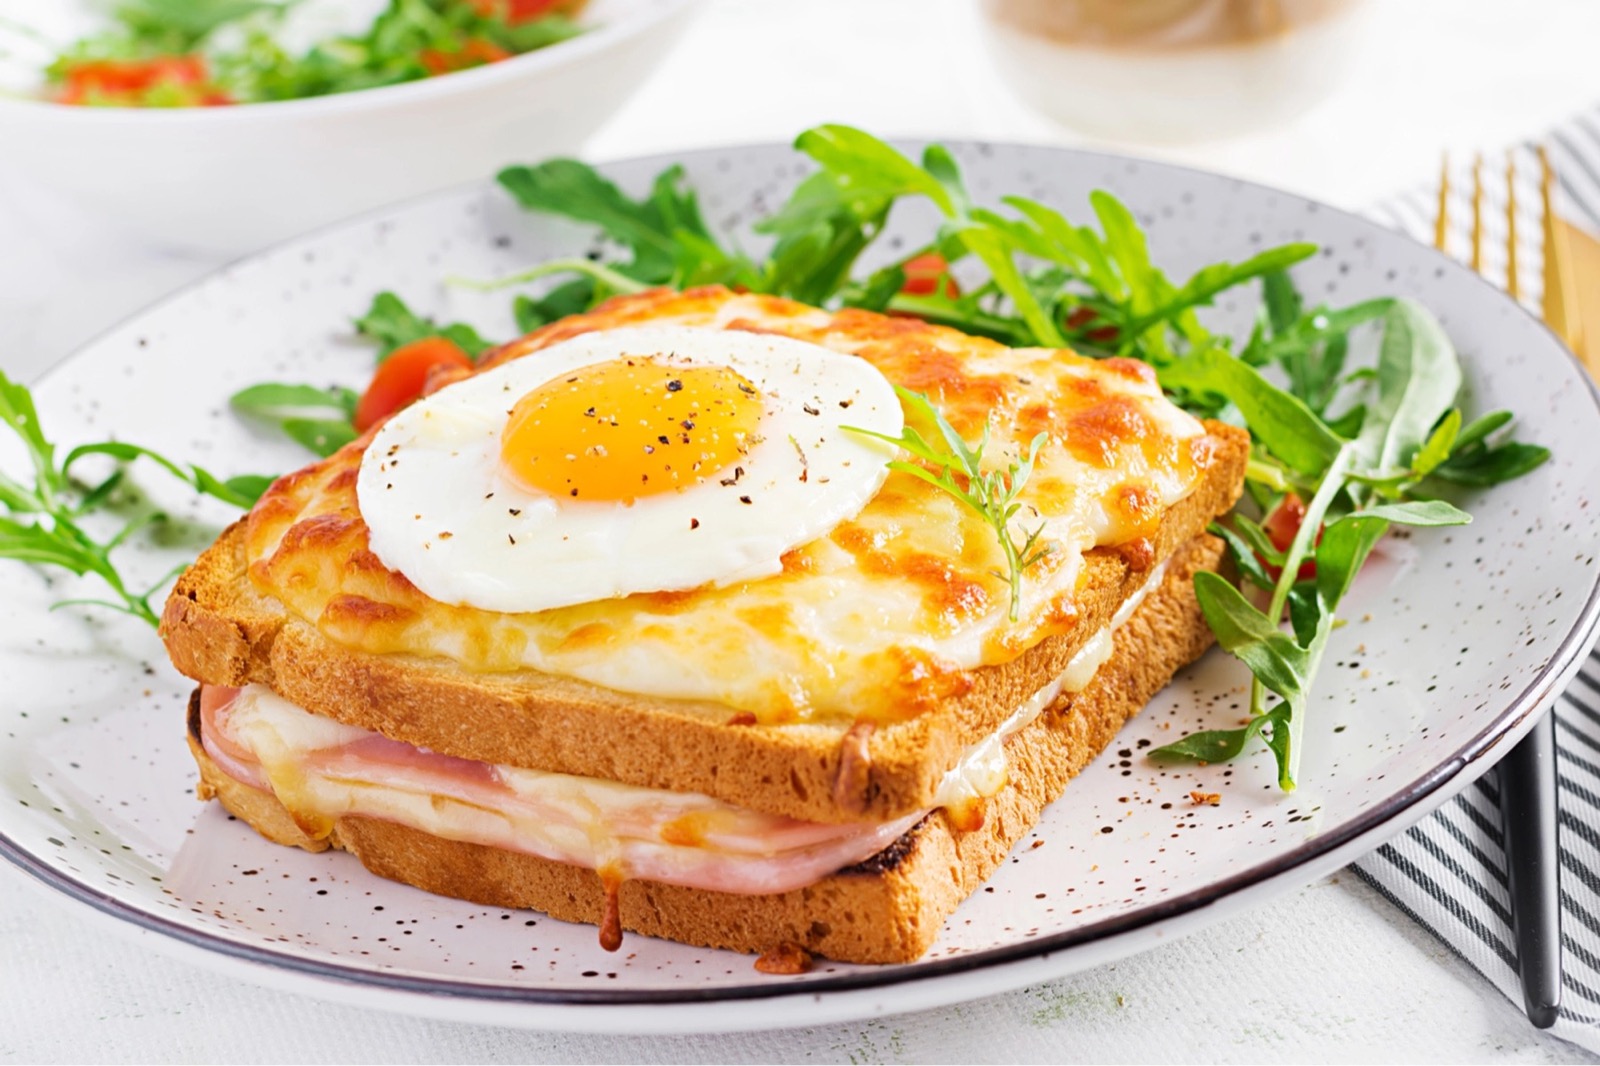 What Dessert Flavor Are You? Croque madame (French ham, egg and cheese sandwich)